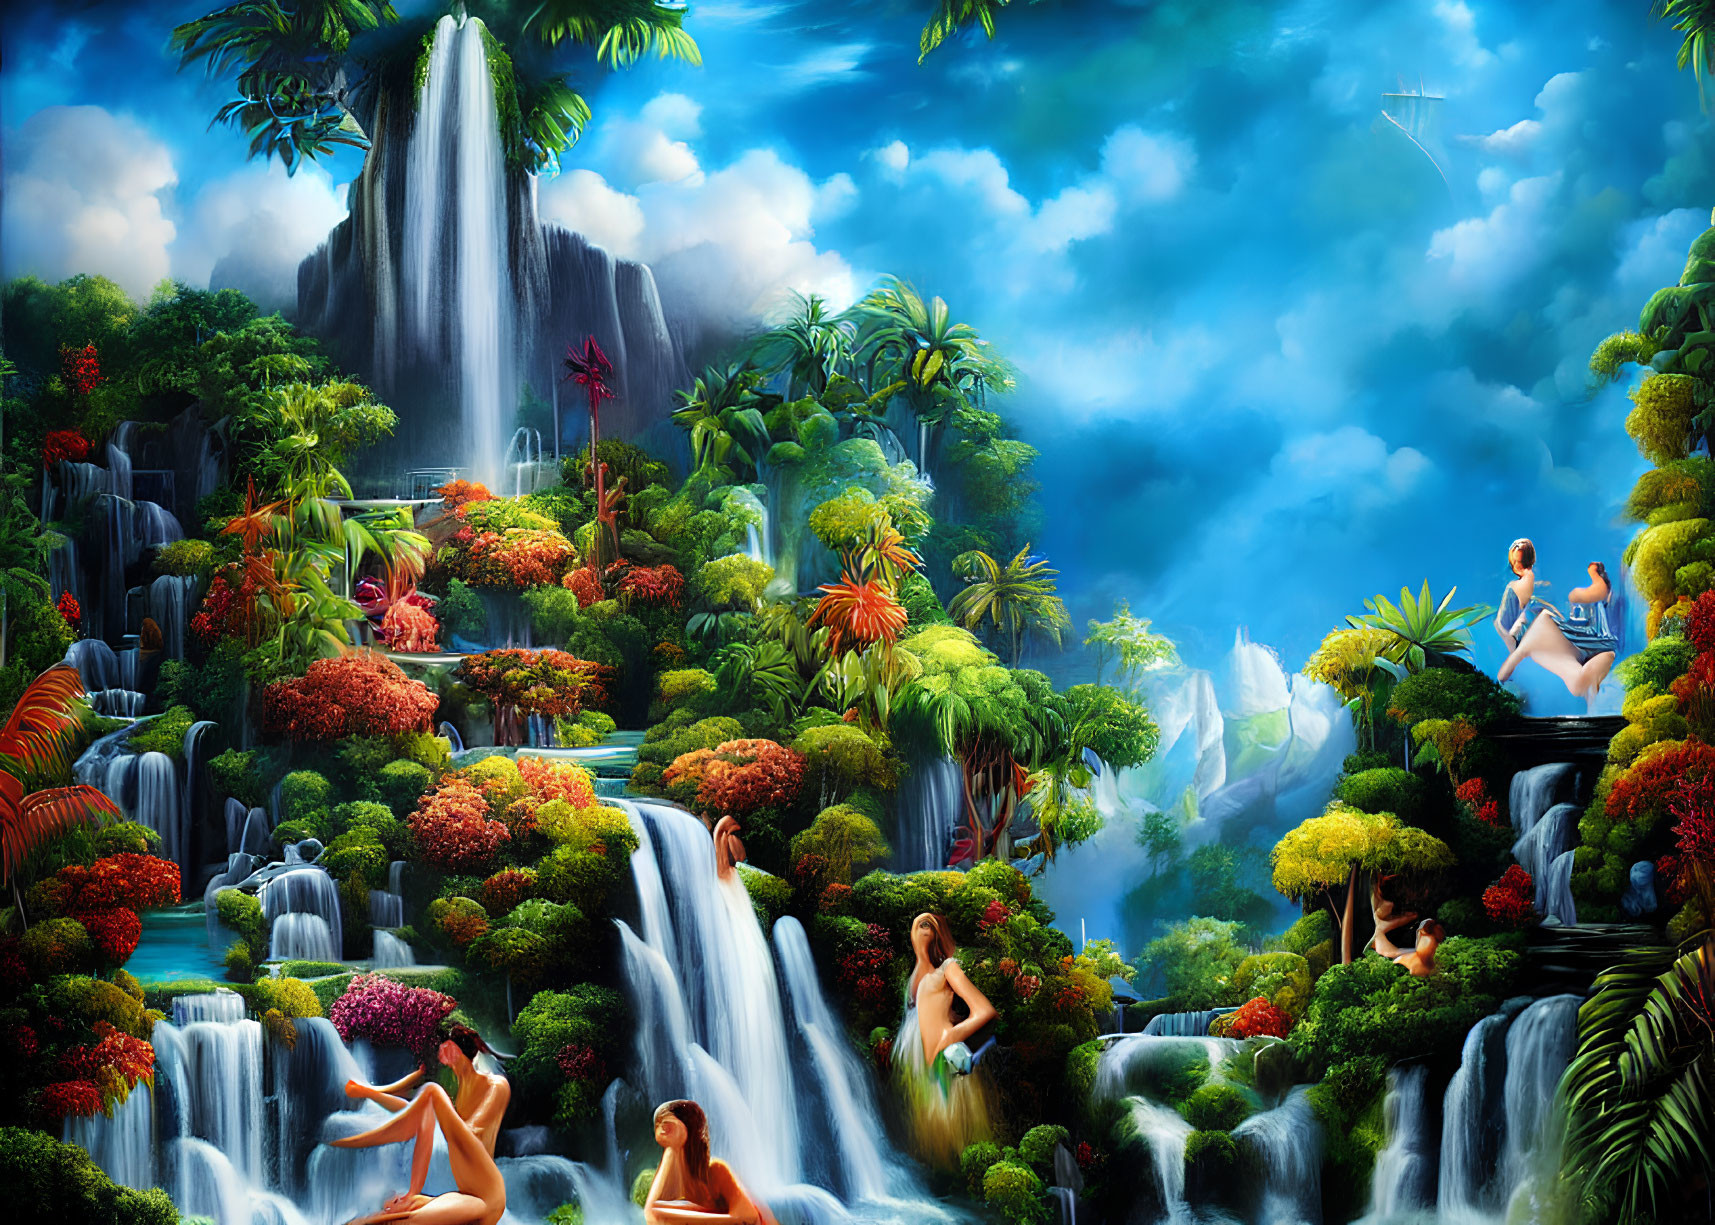 Fantastical landscape with waterfalls, greenery, plants, and ethereal figures.